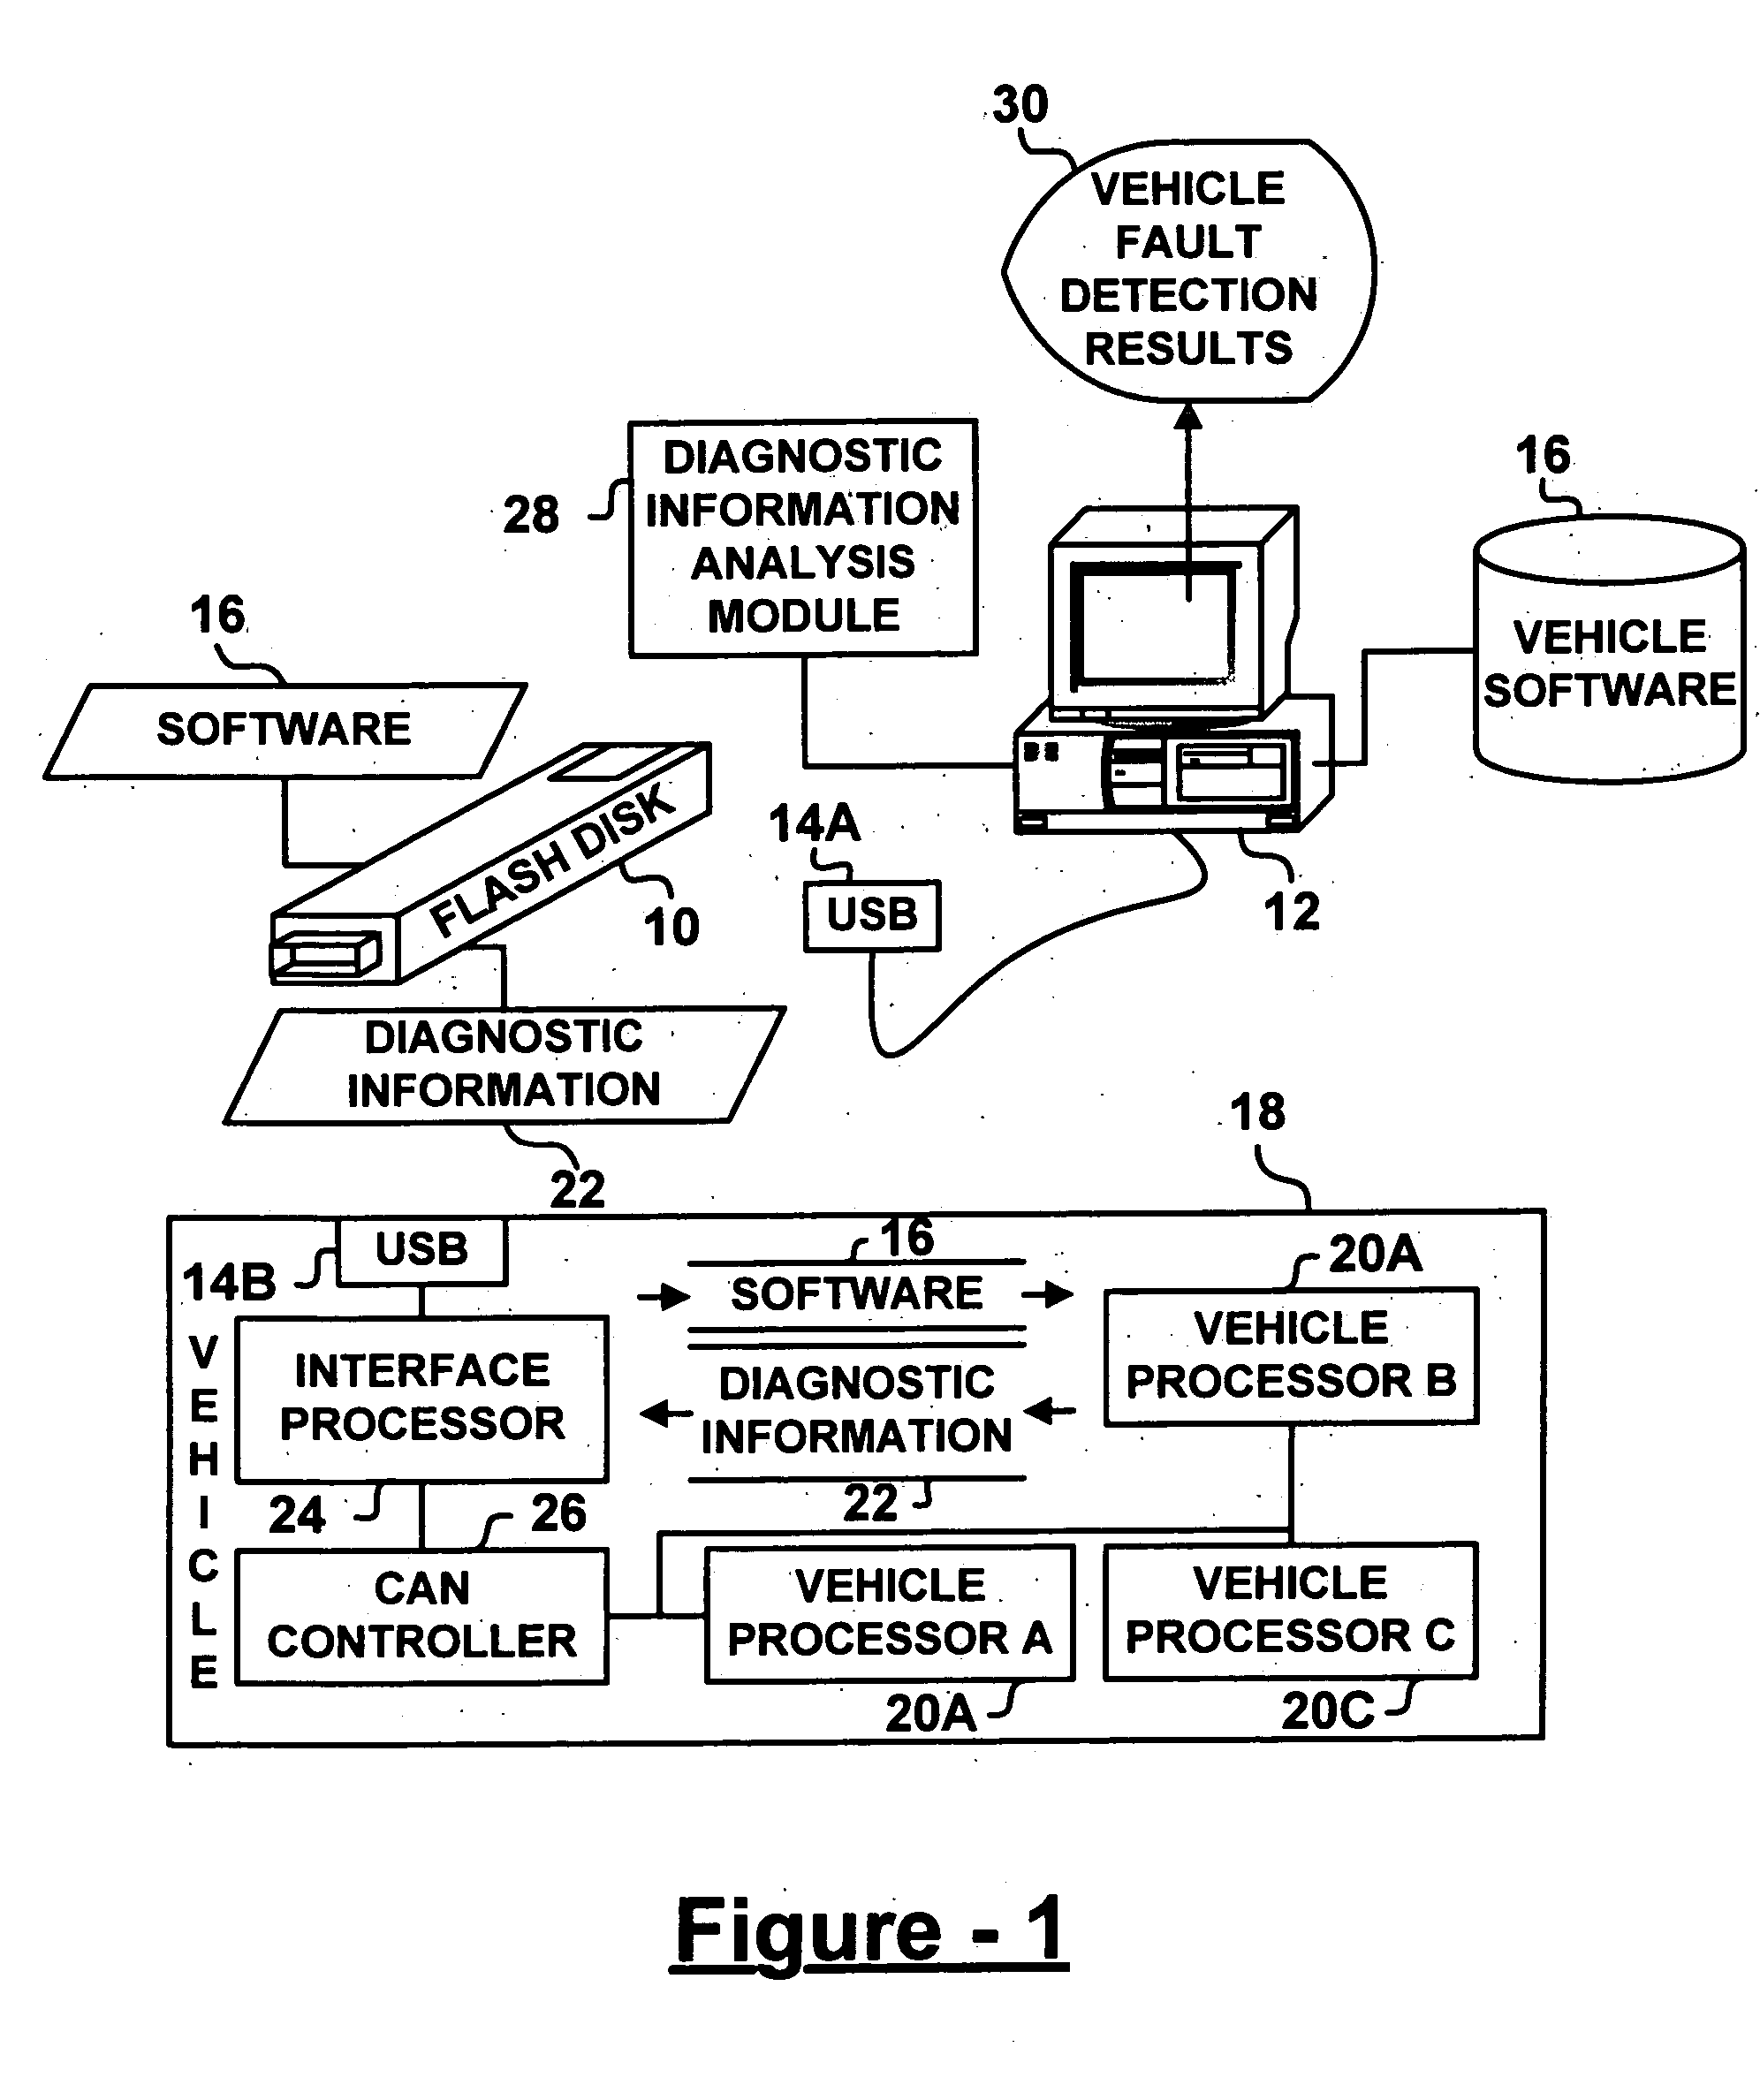 System and method to load vehicle operation software and calibration data in general assembly and service environment